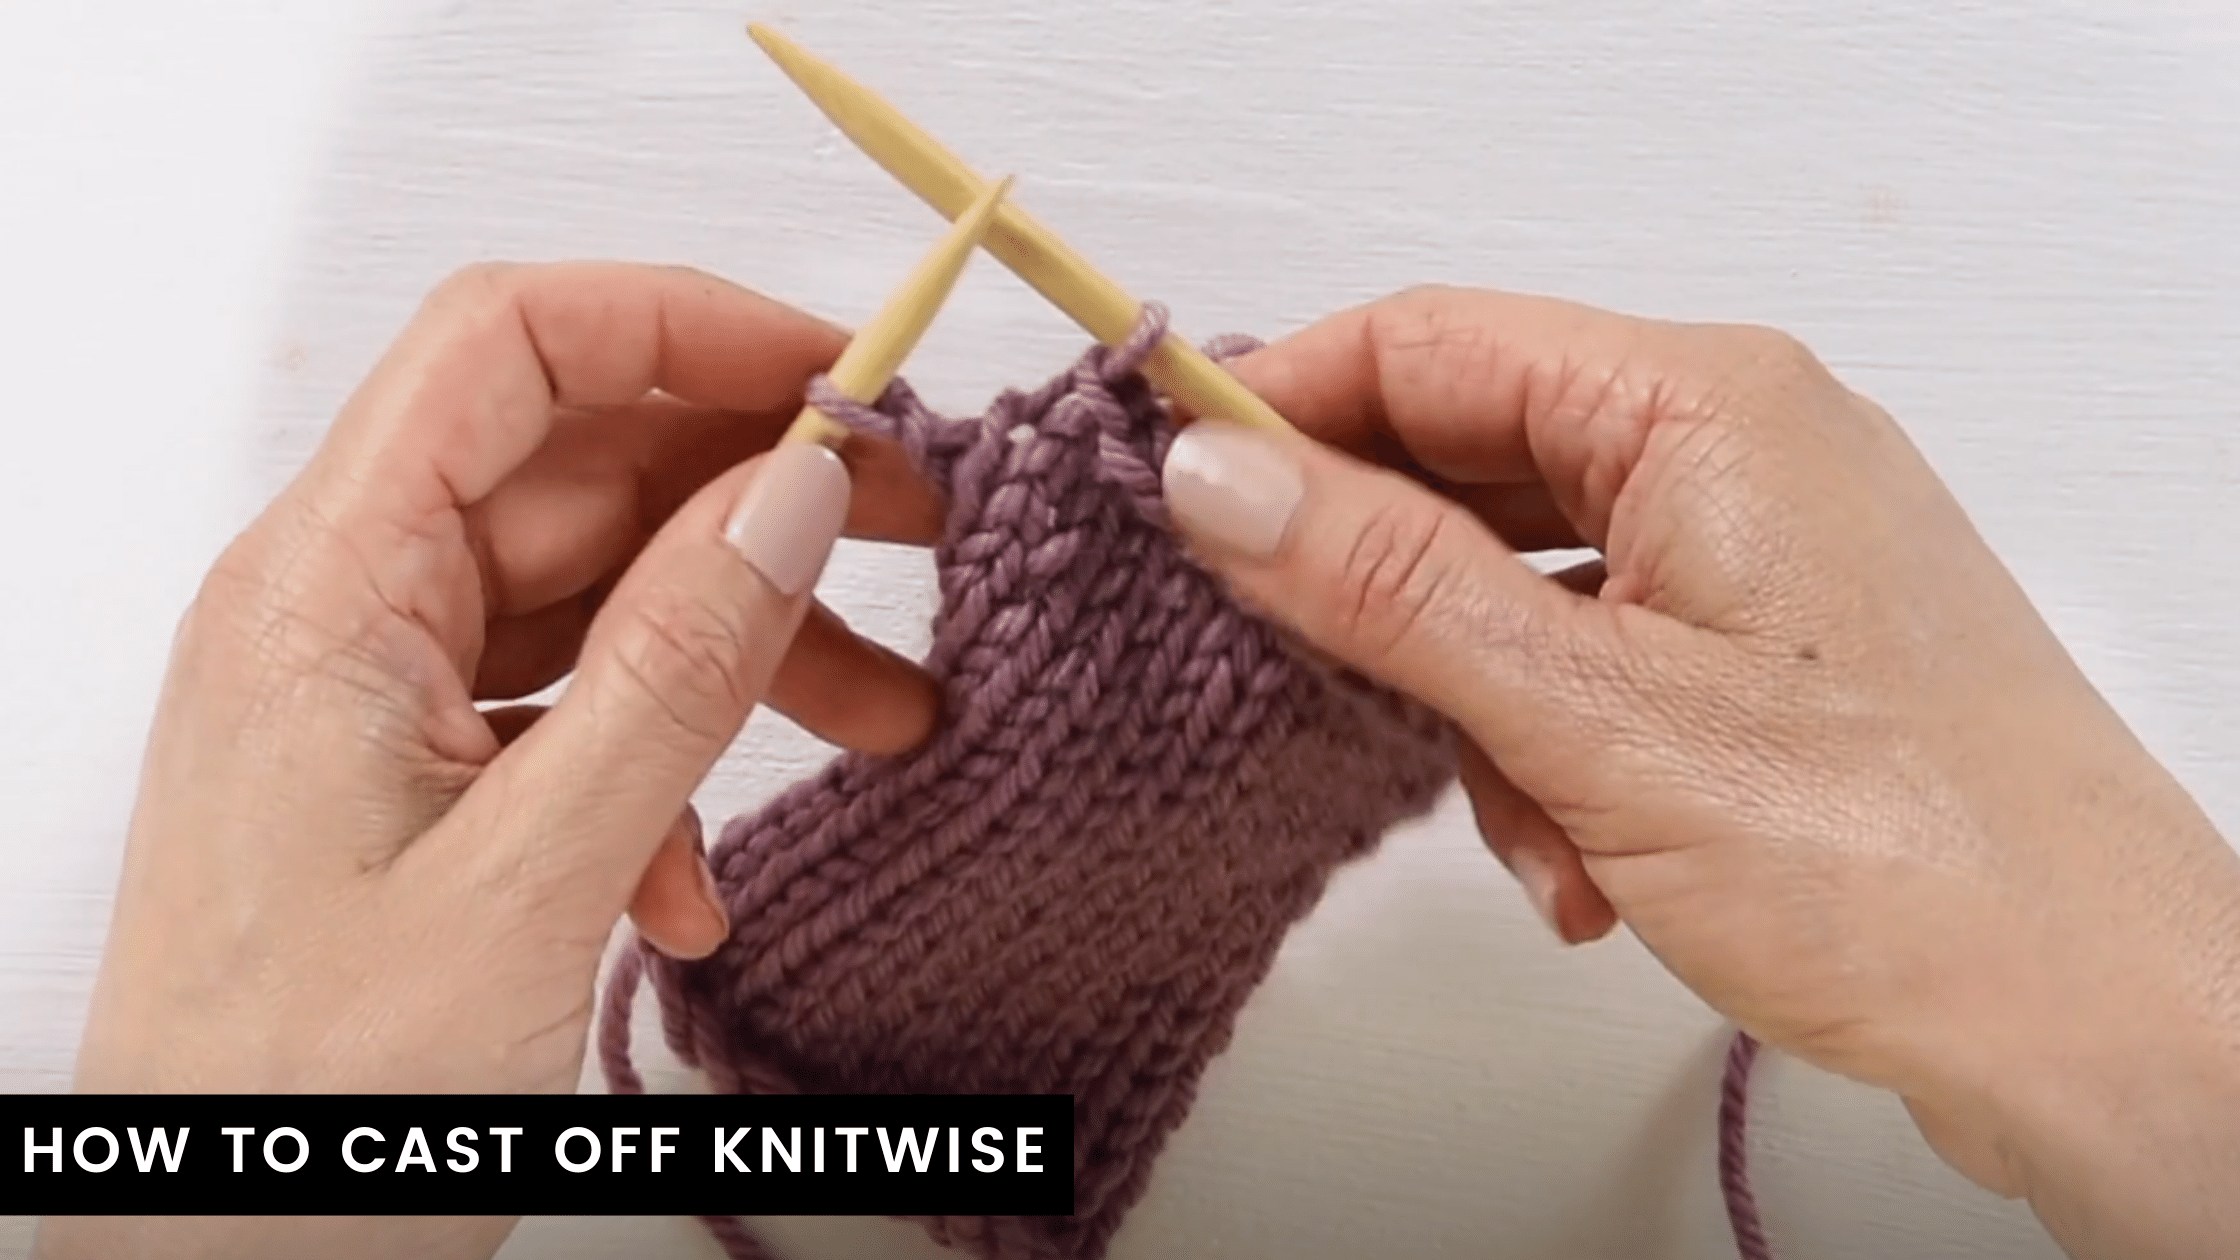 Free Knitting Videos: Ultimate Guide to Knitting for Beginners, Blog